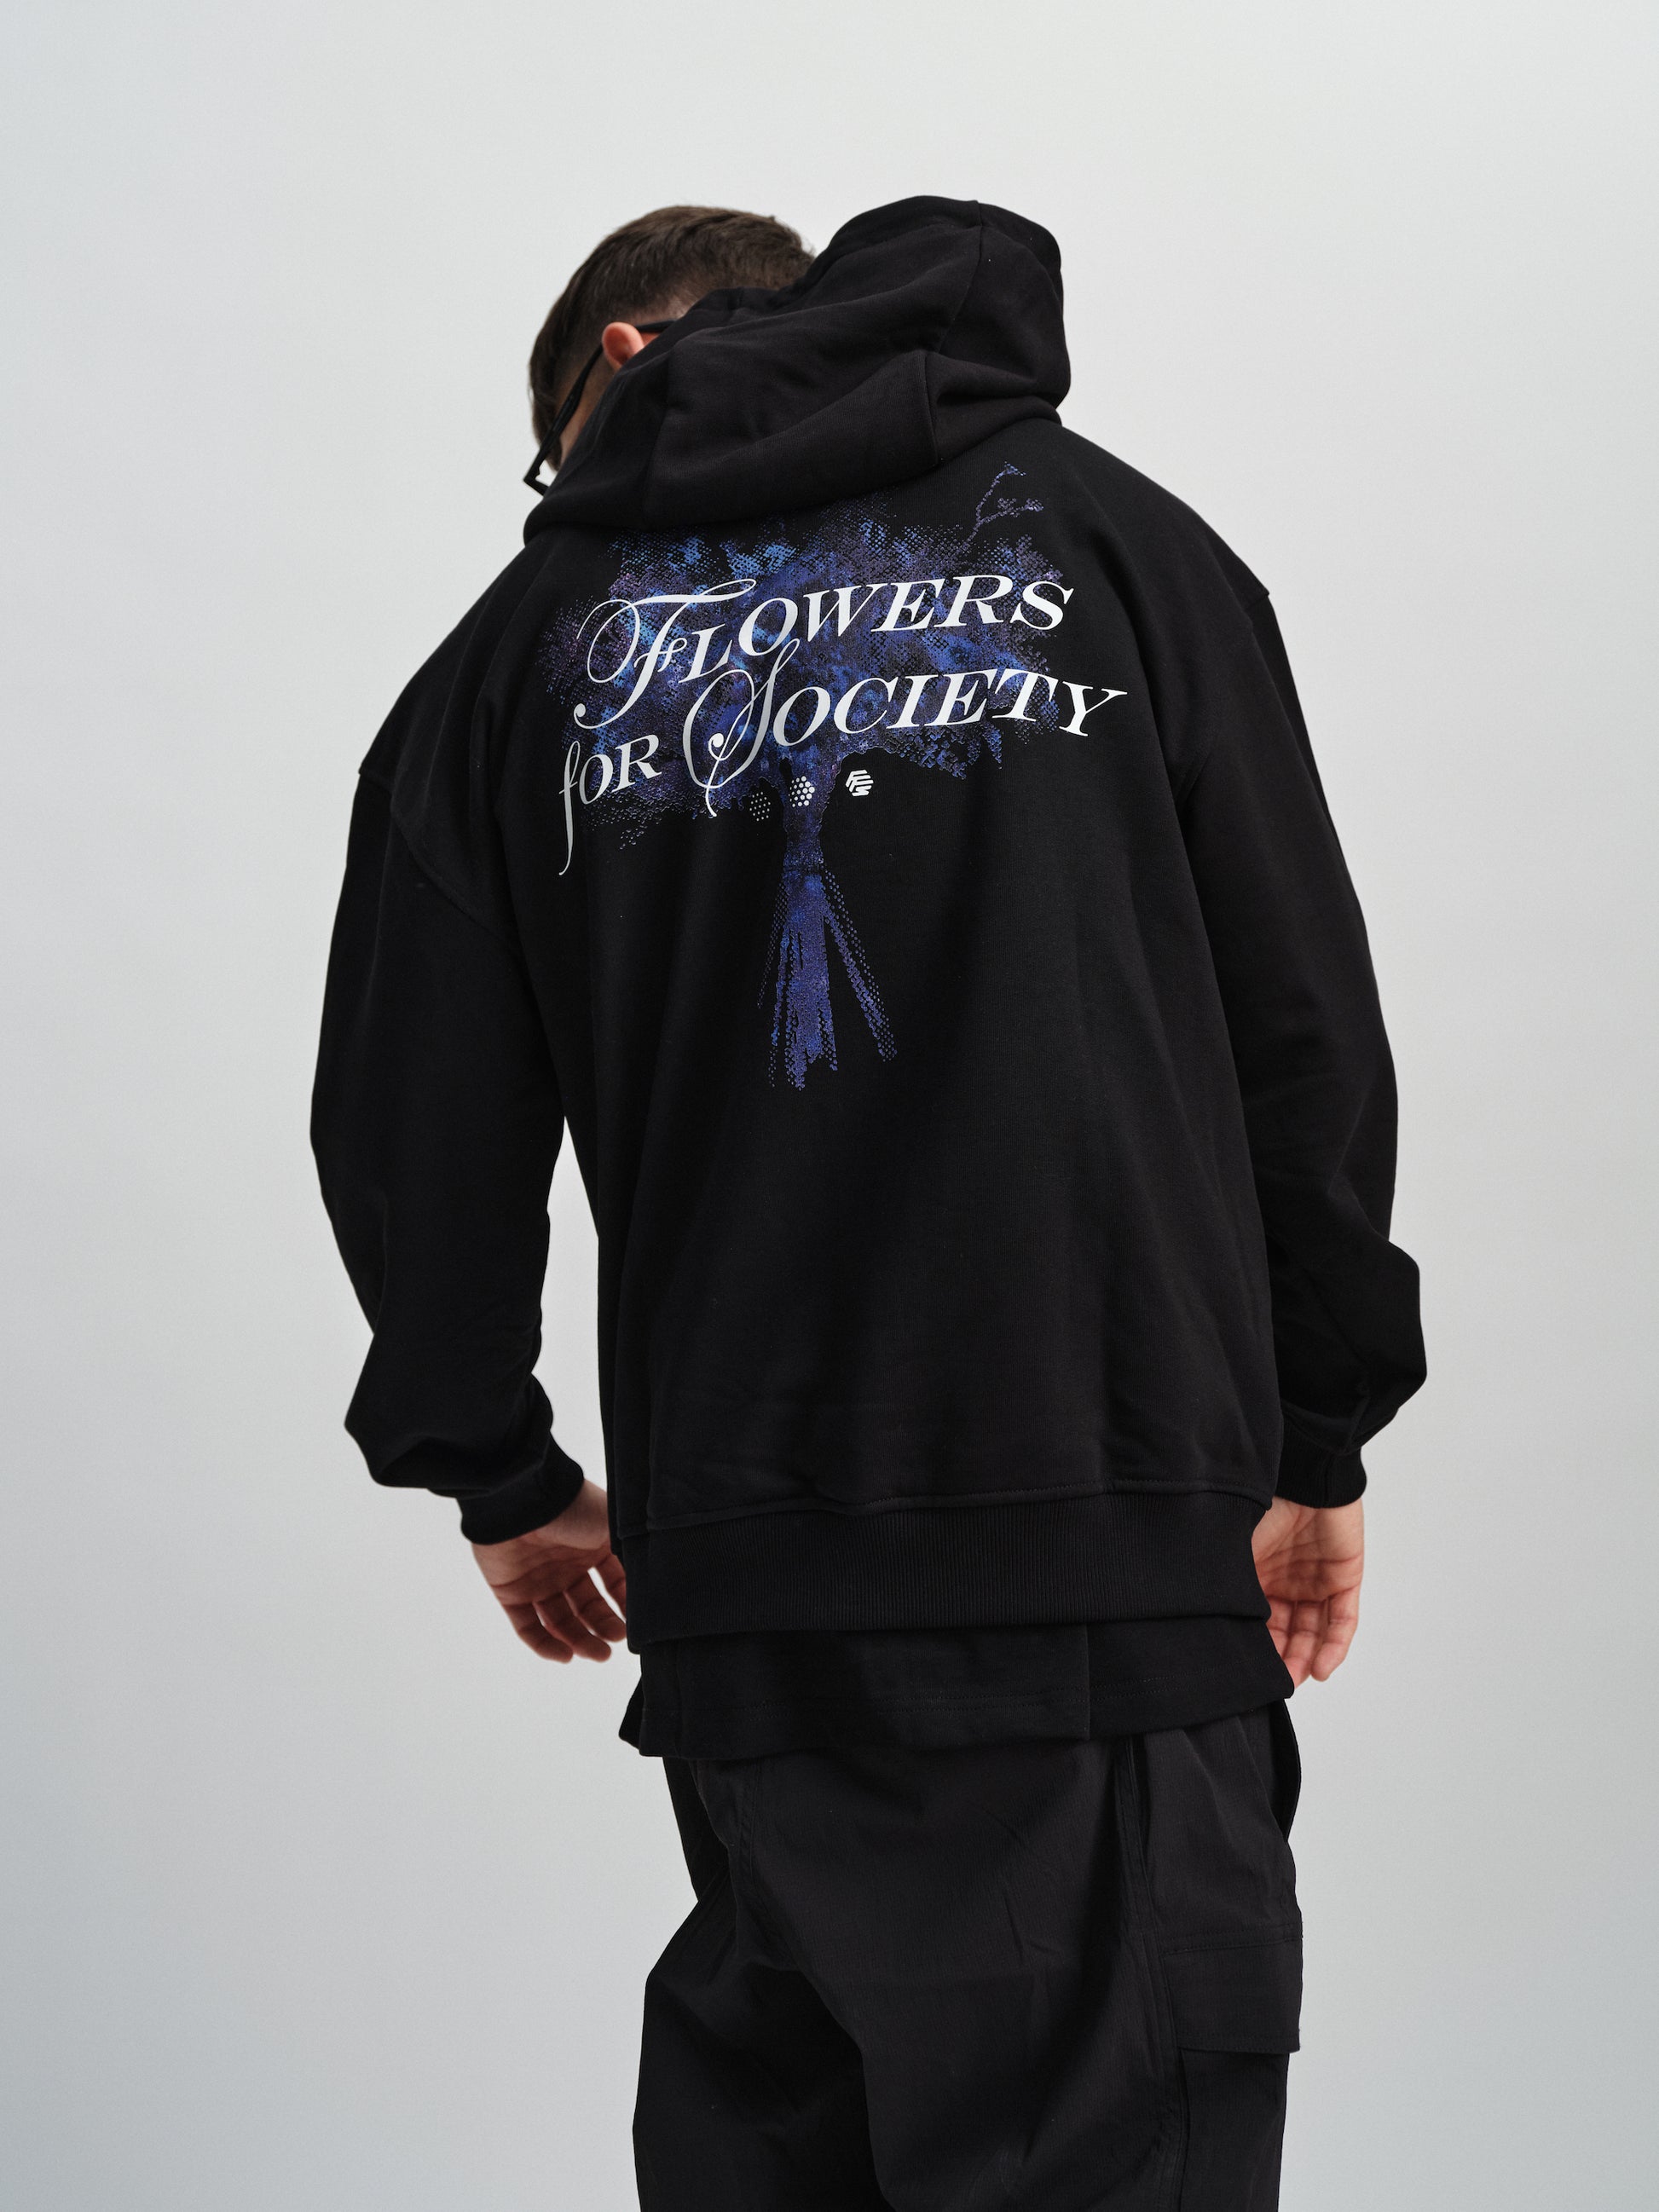 Flowers for Society bouquet hoodie black back view worn by model Angelo